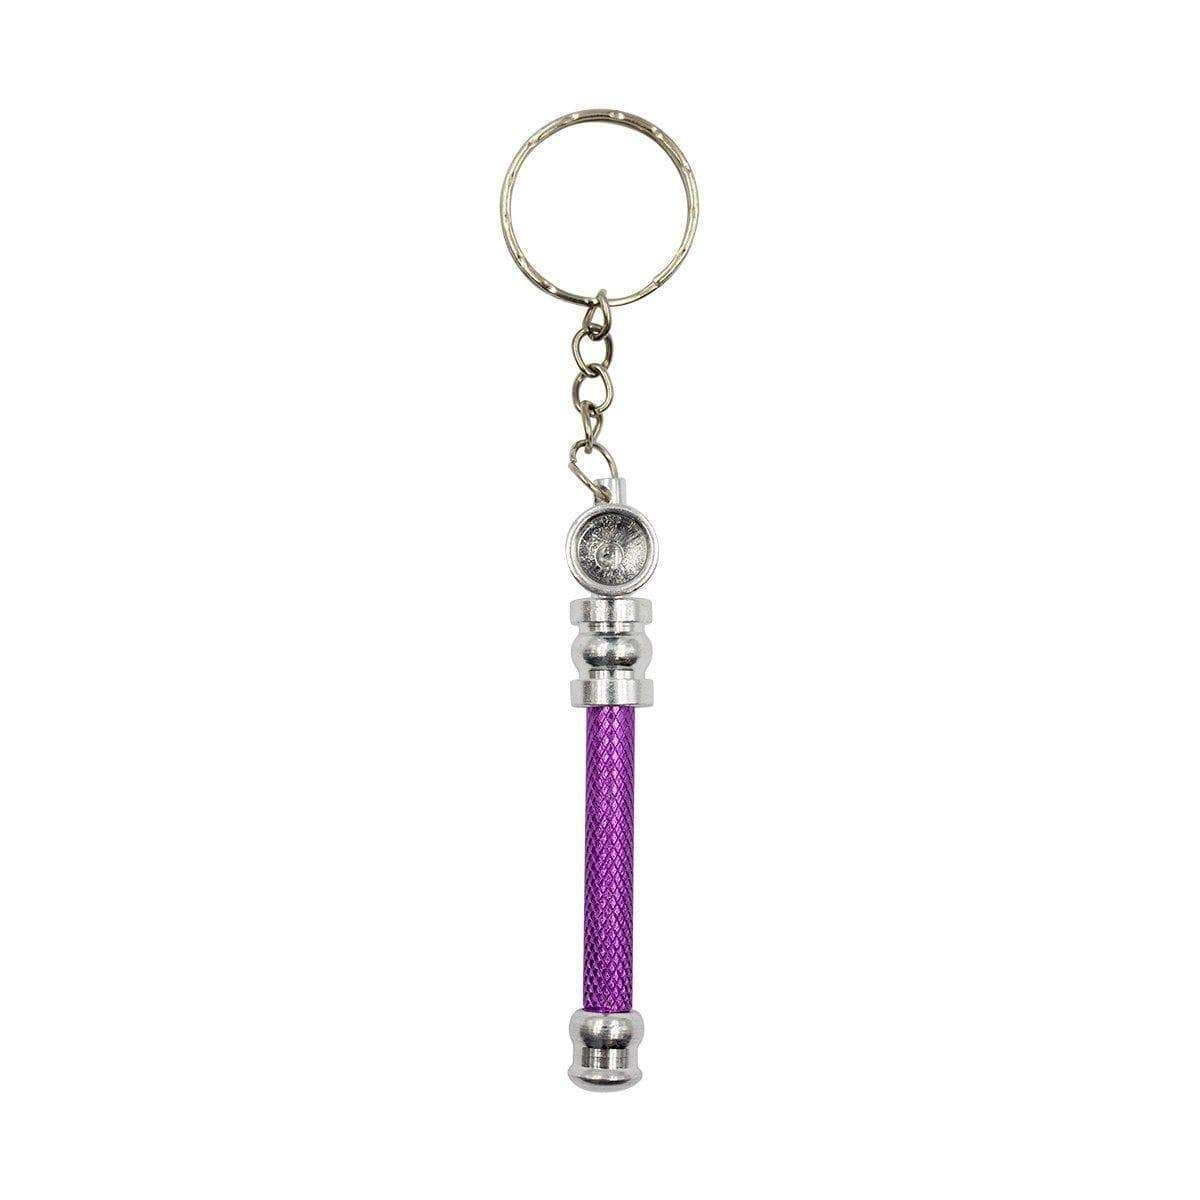 Mini keychain pipe smoking accessory in a cylinder hammer-like shape vibrant Purple stainless steel both ends with keyring